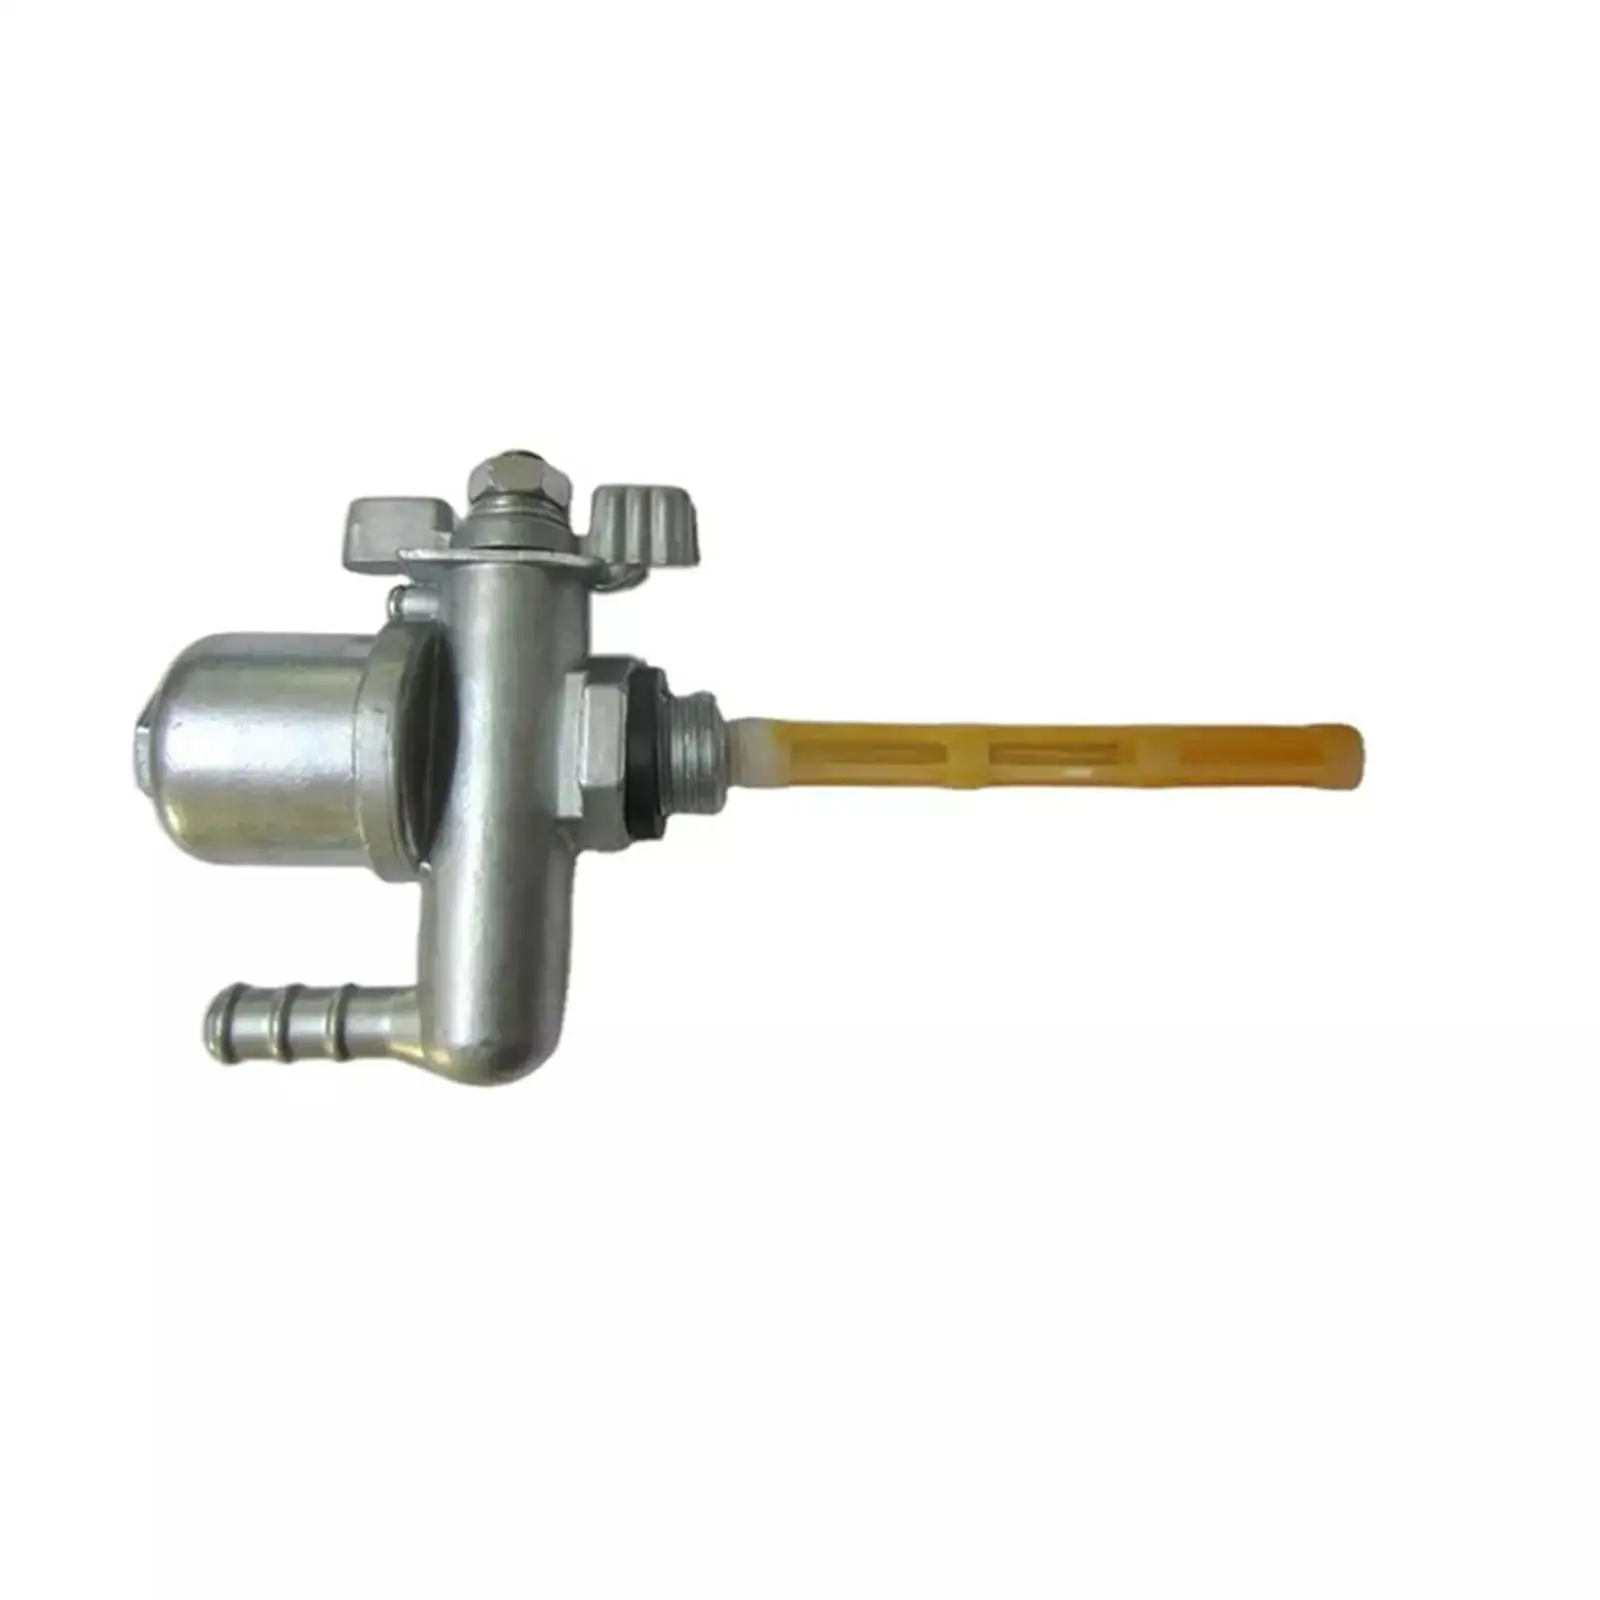 Motorcycle fuel Switch Pump Valve Petcock Replacement Fits for Ruassia Msk